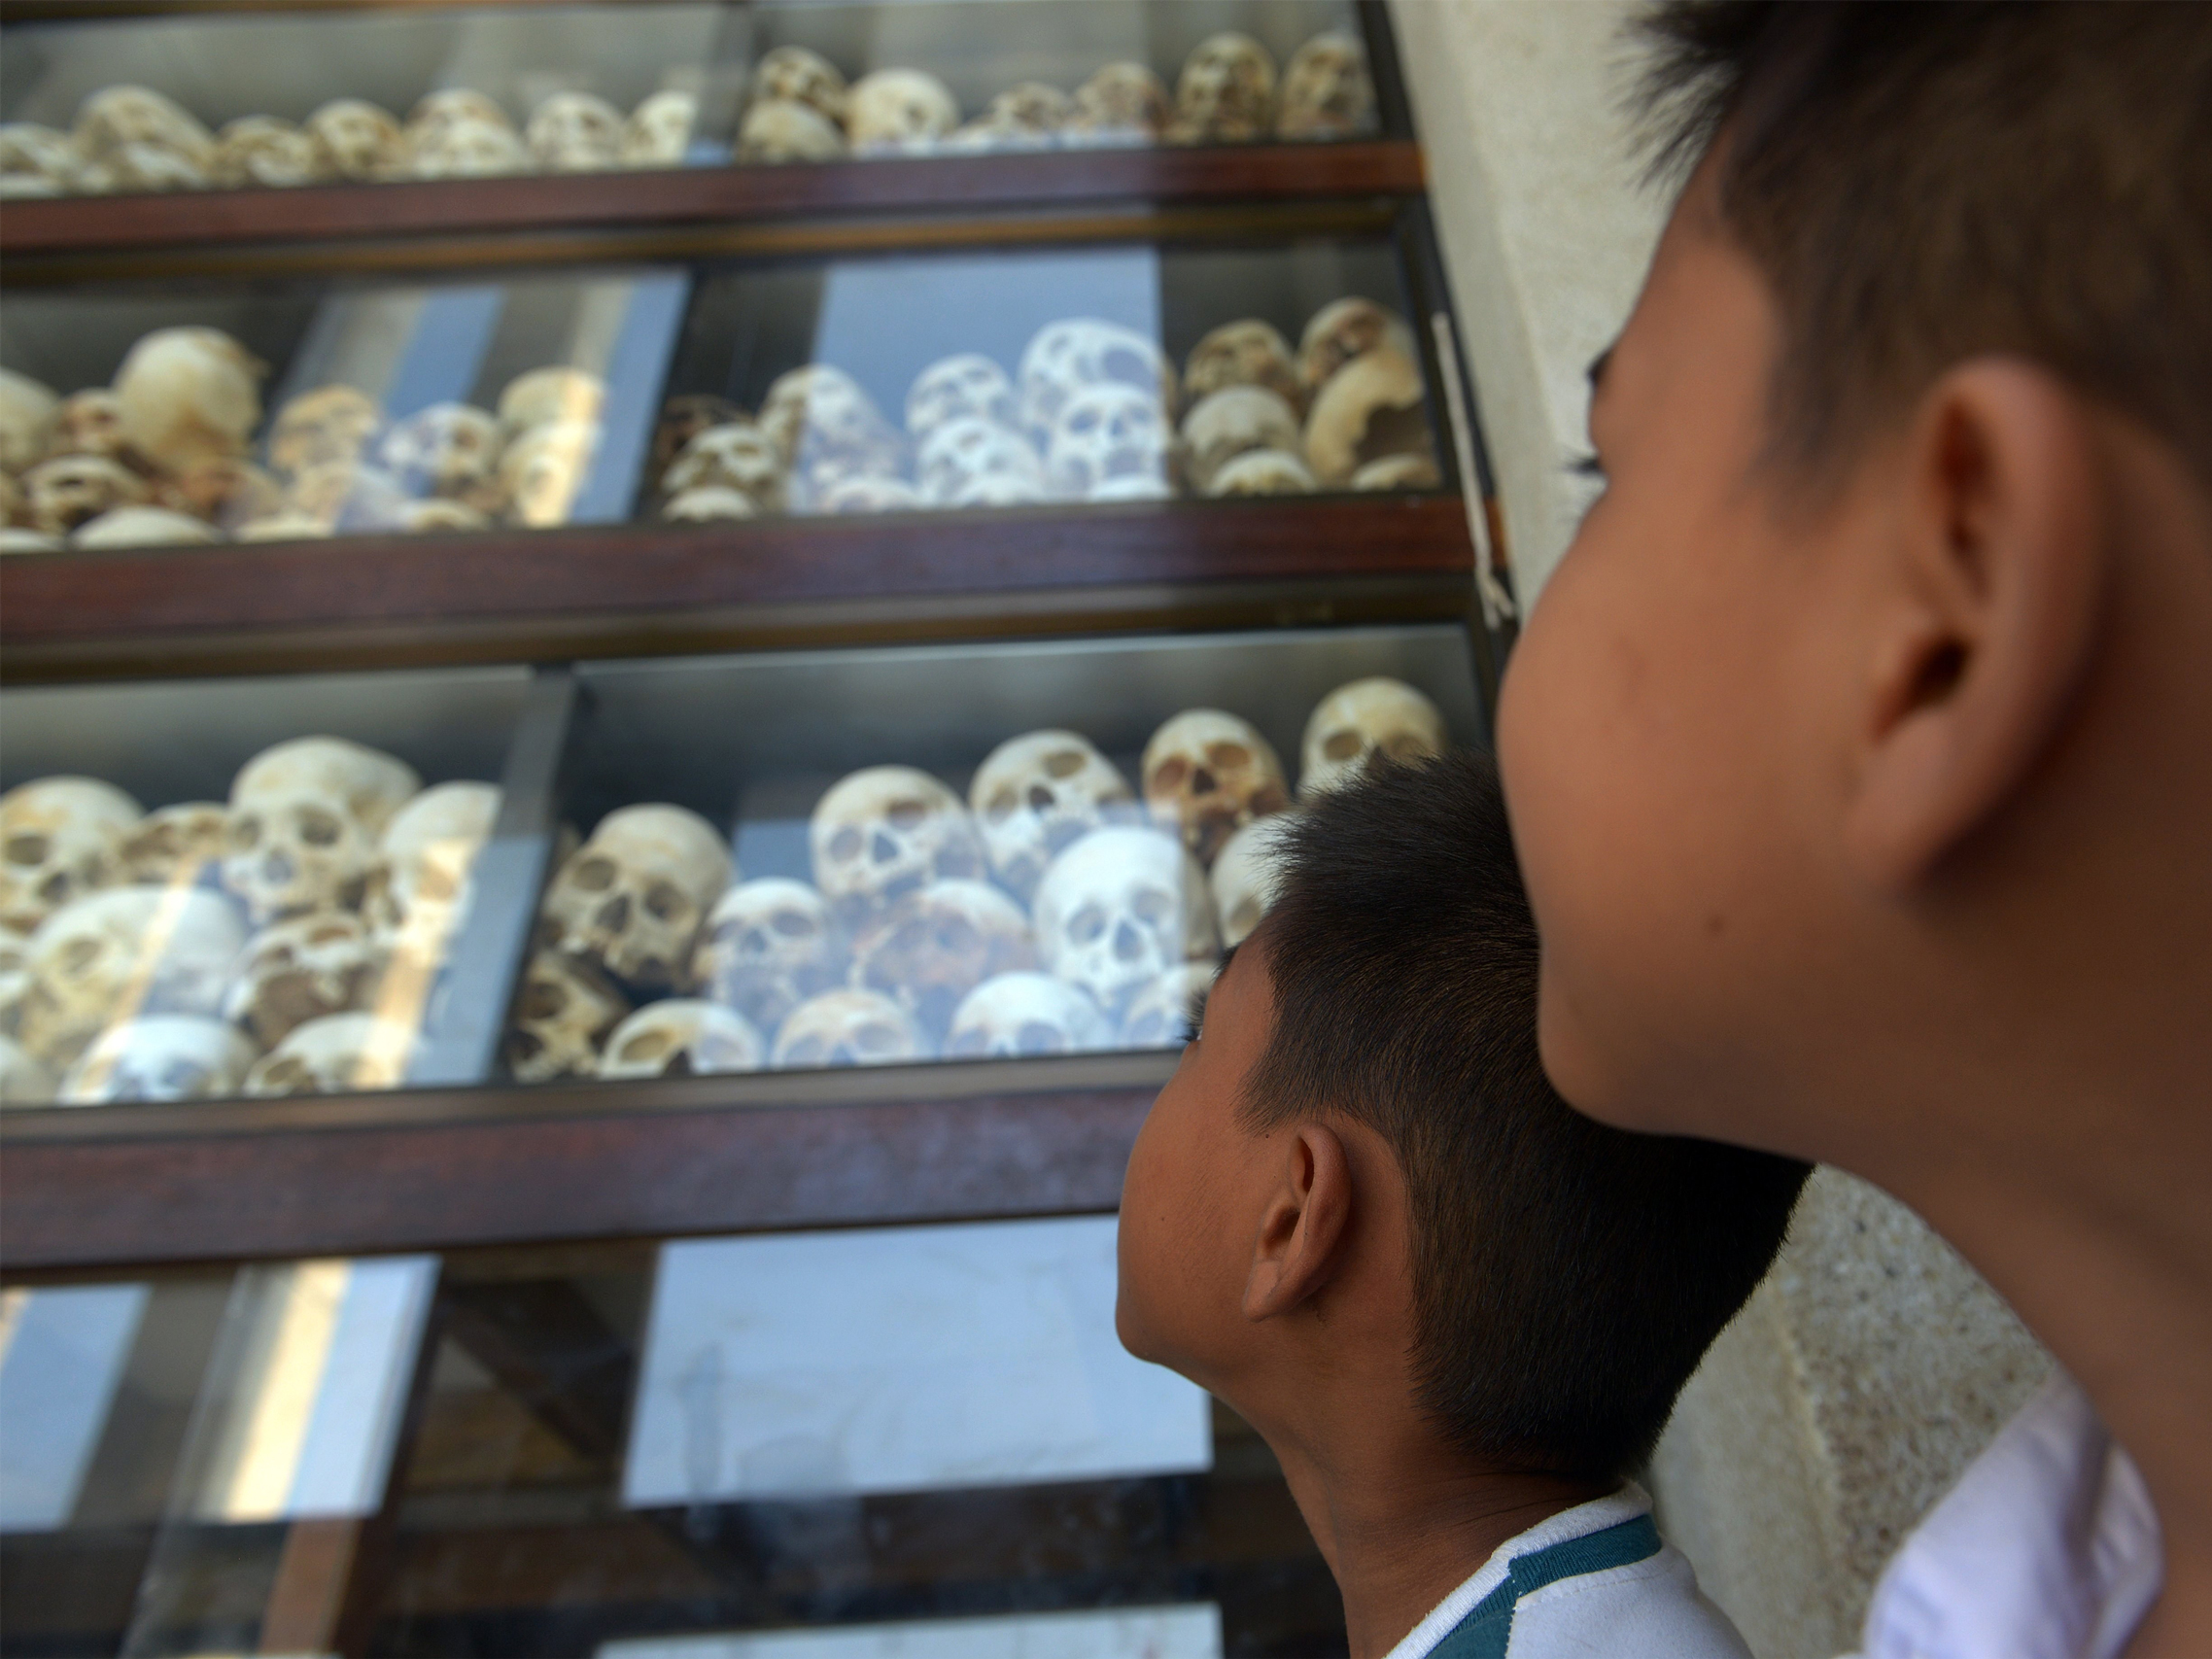 A photo showing children looking at skulls on display at the Killing Fields Memorial in Phnom Penh, Cambodia on April 17, 2014.